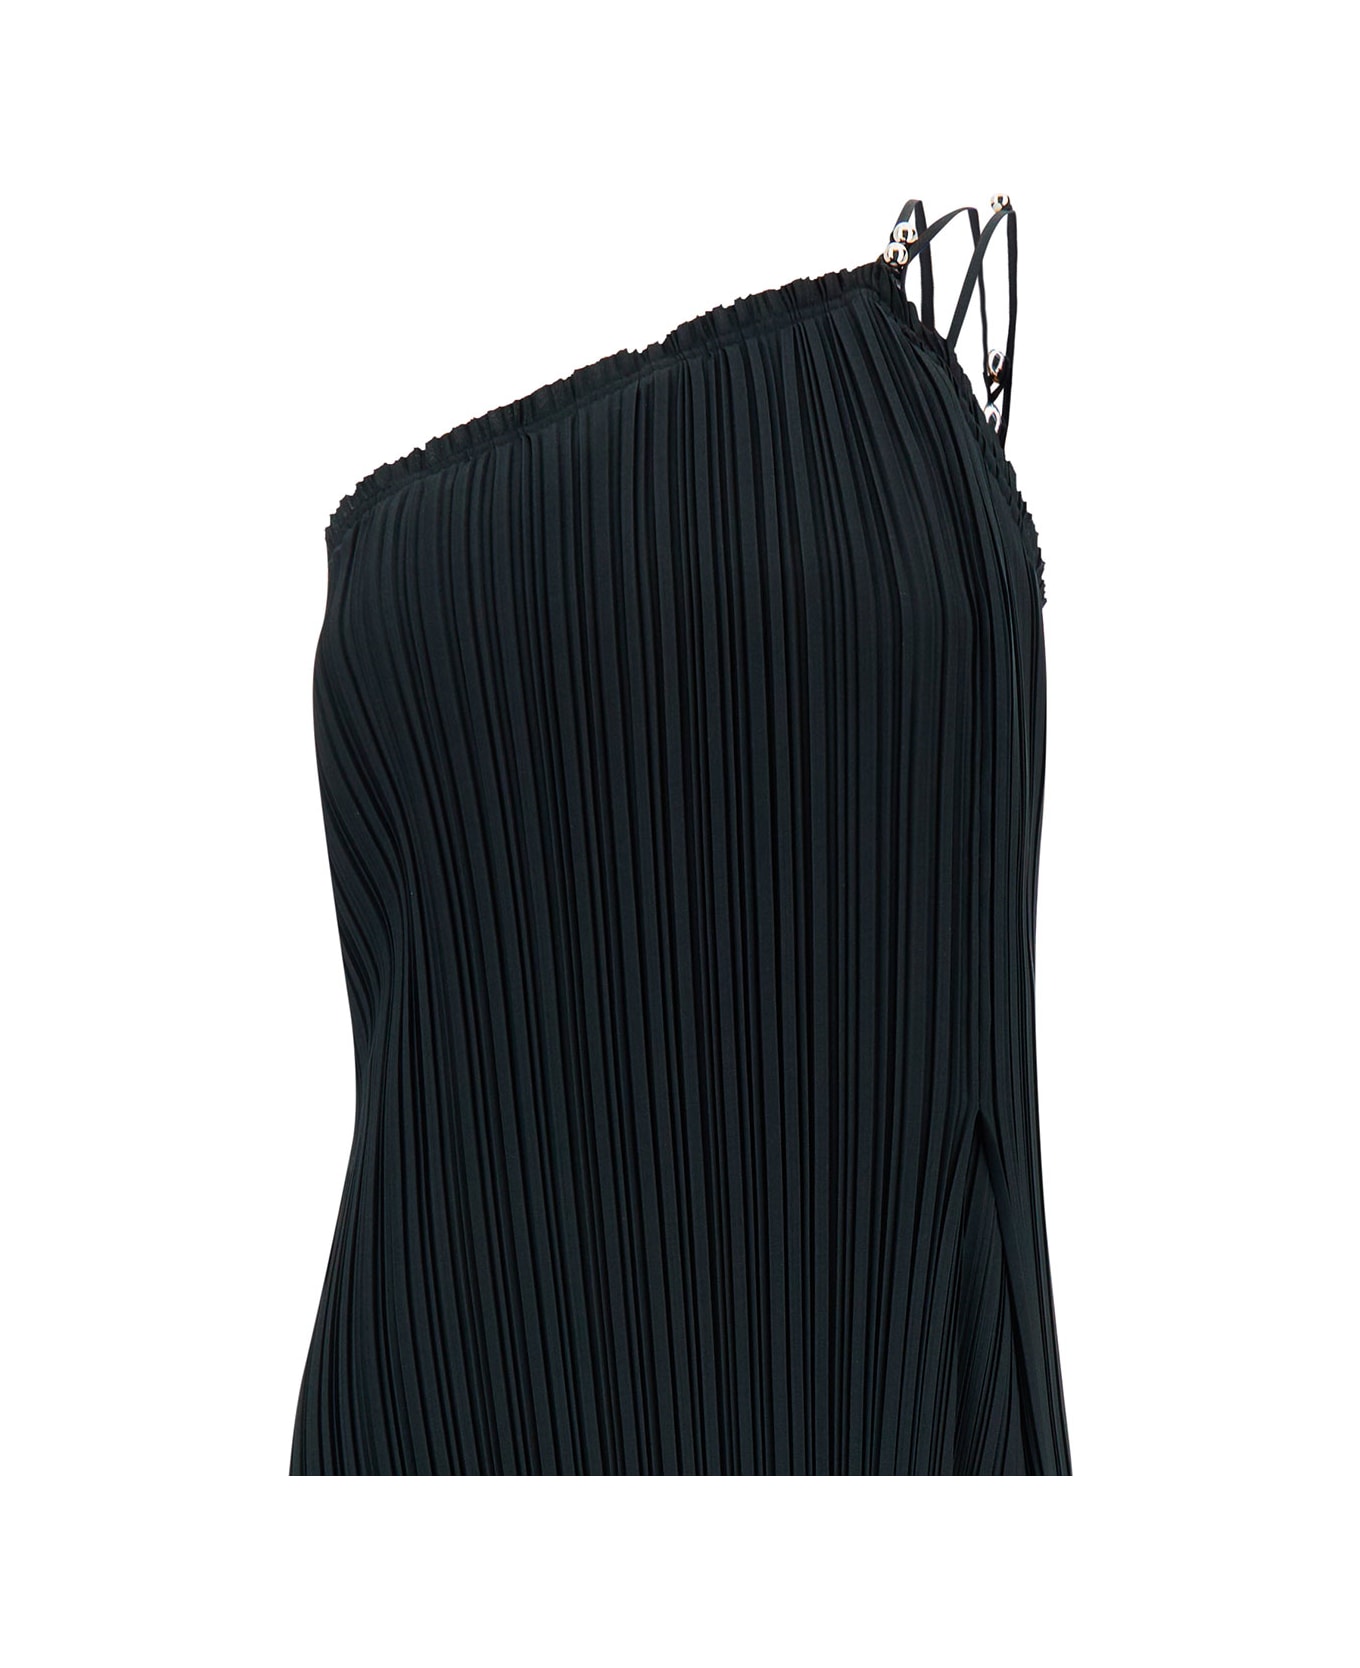 Lanvin Maxi Black One-shoulder Pleated Dress With Beads In Crêpe De Chine Woman - Black